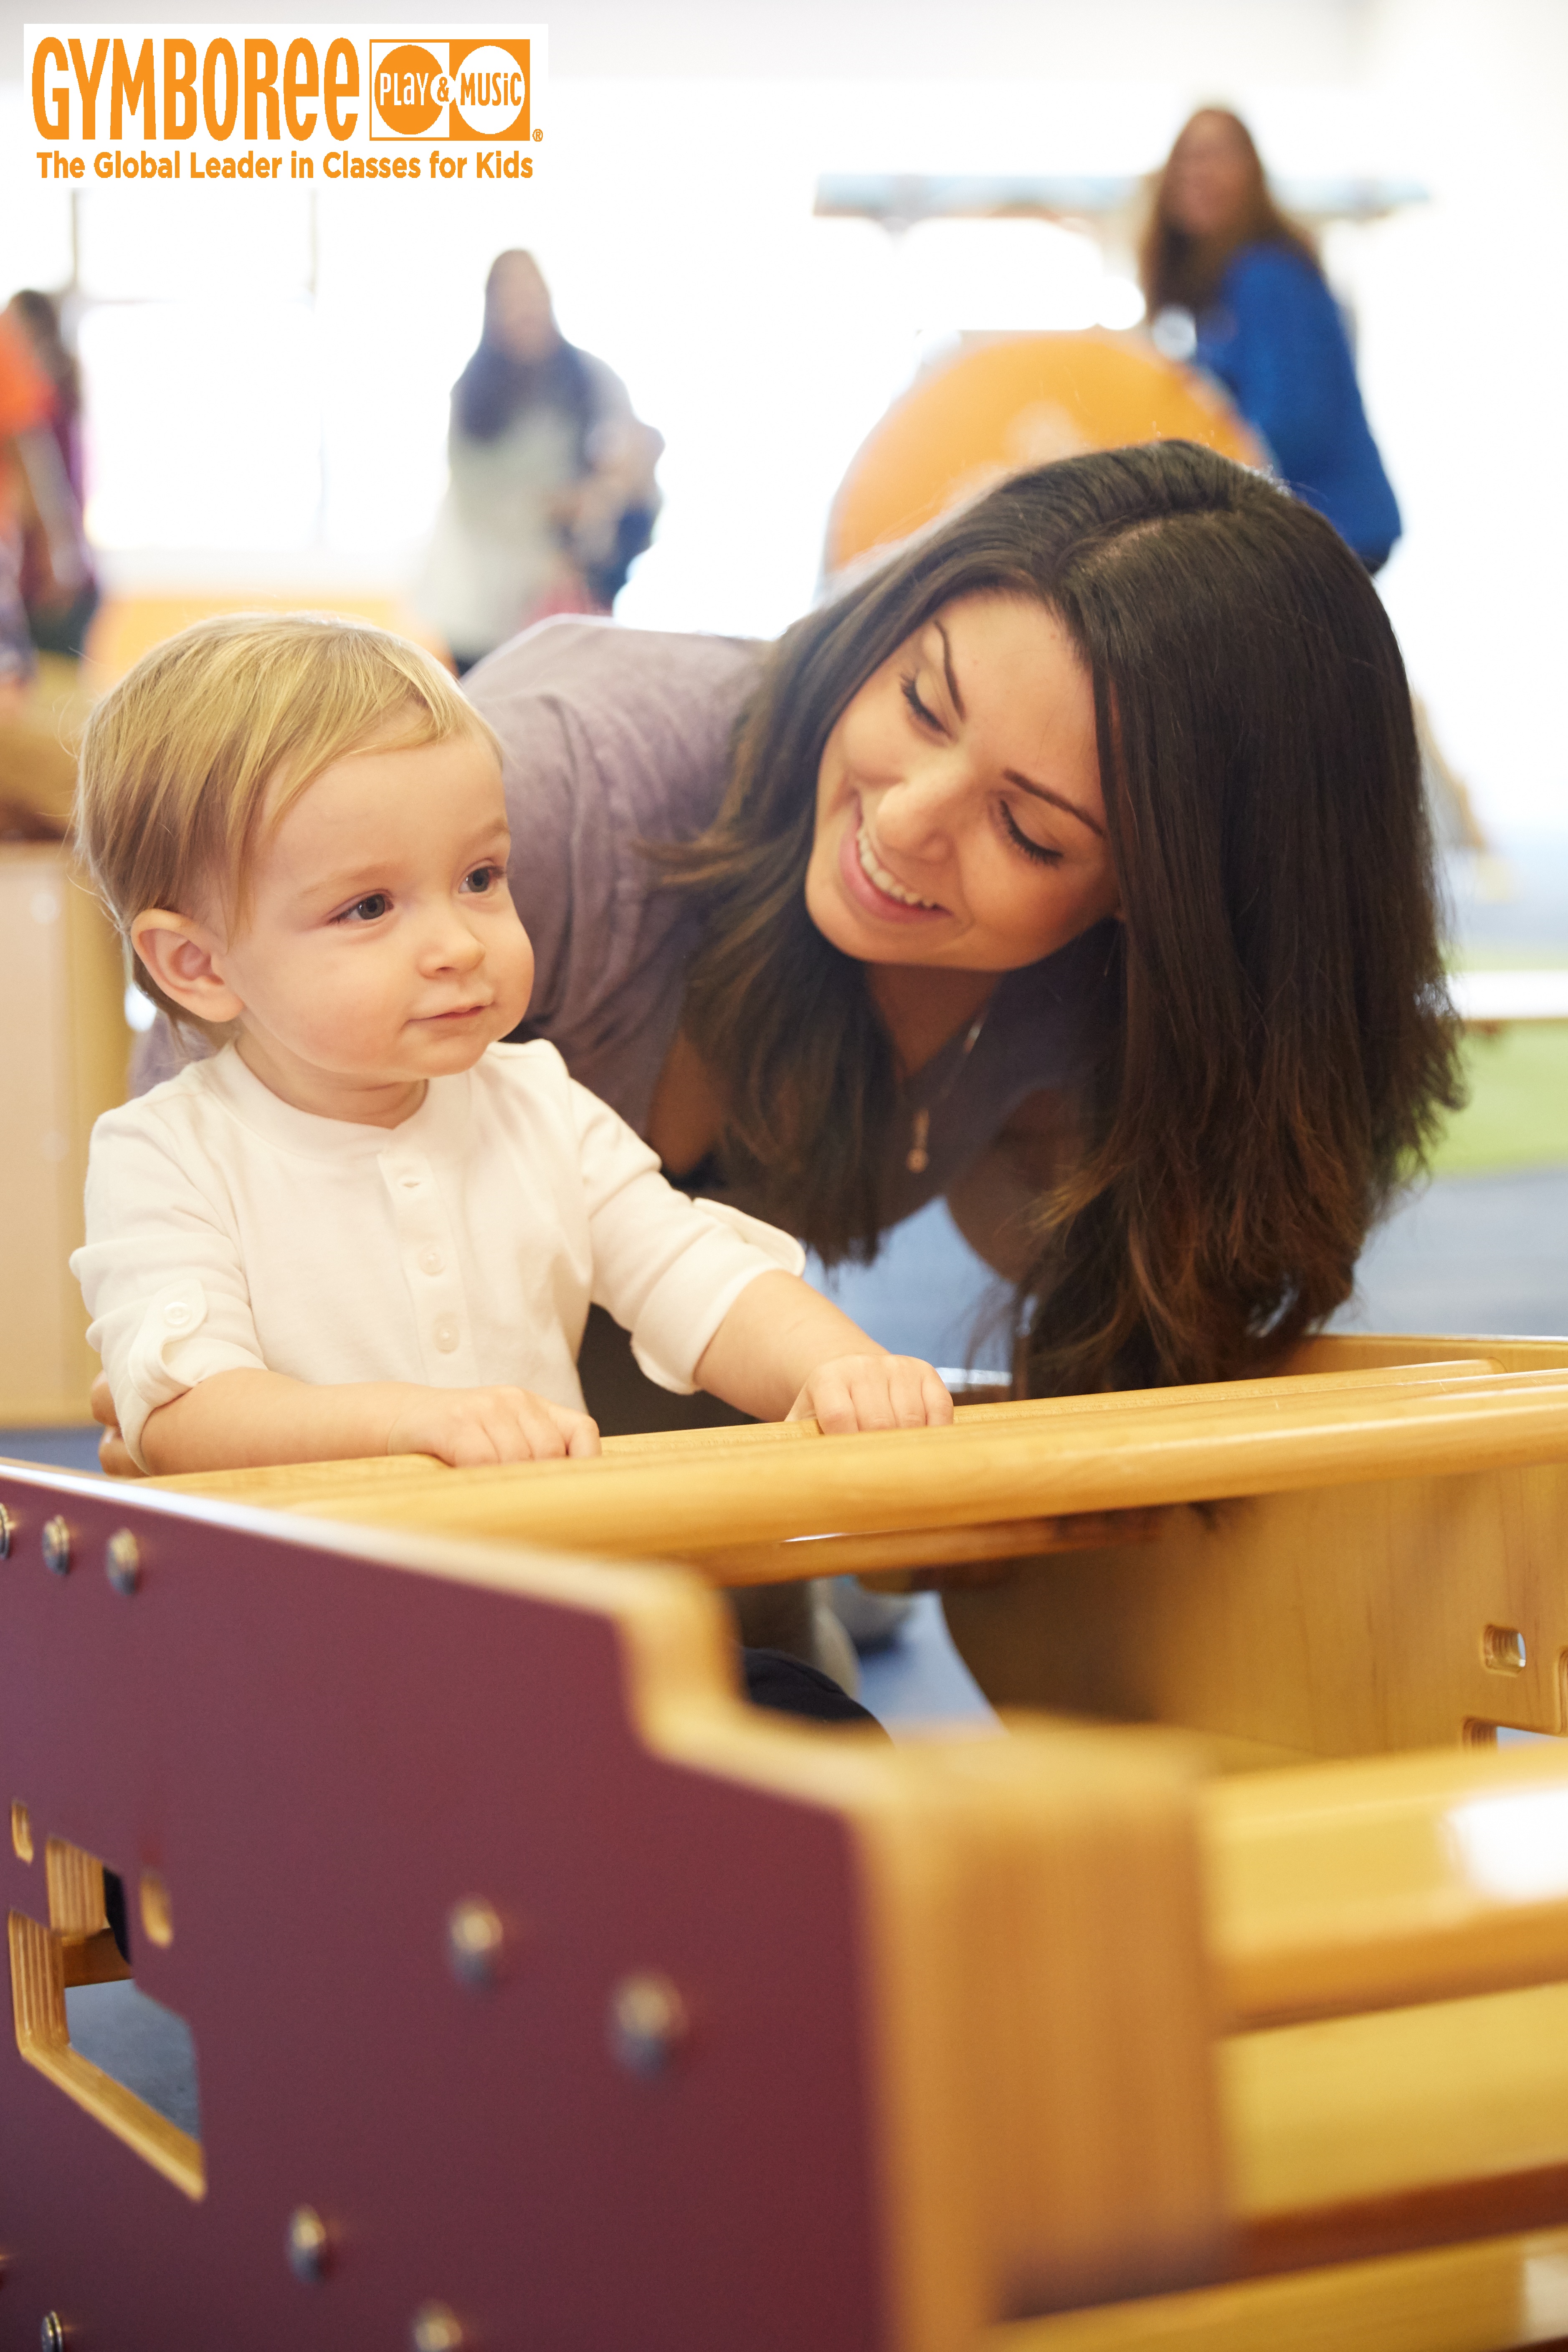 5 Attachment-Based Activities to Strengthen Parent-Child Relationships